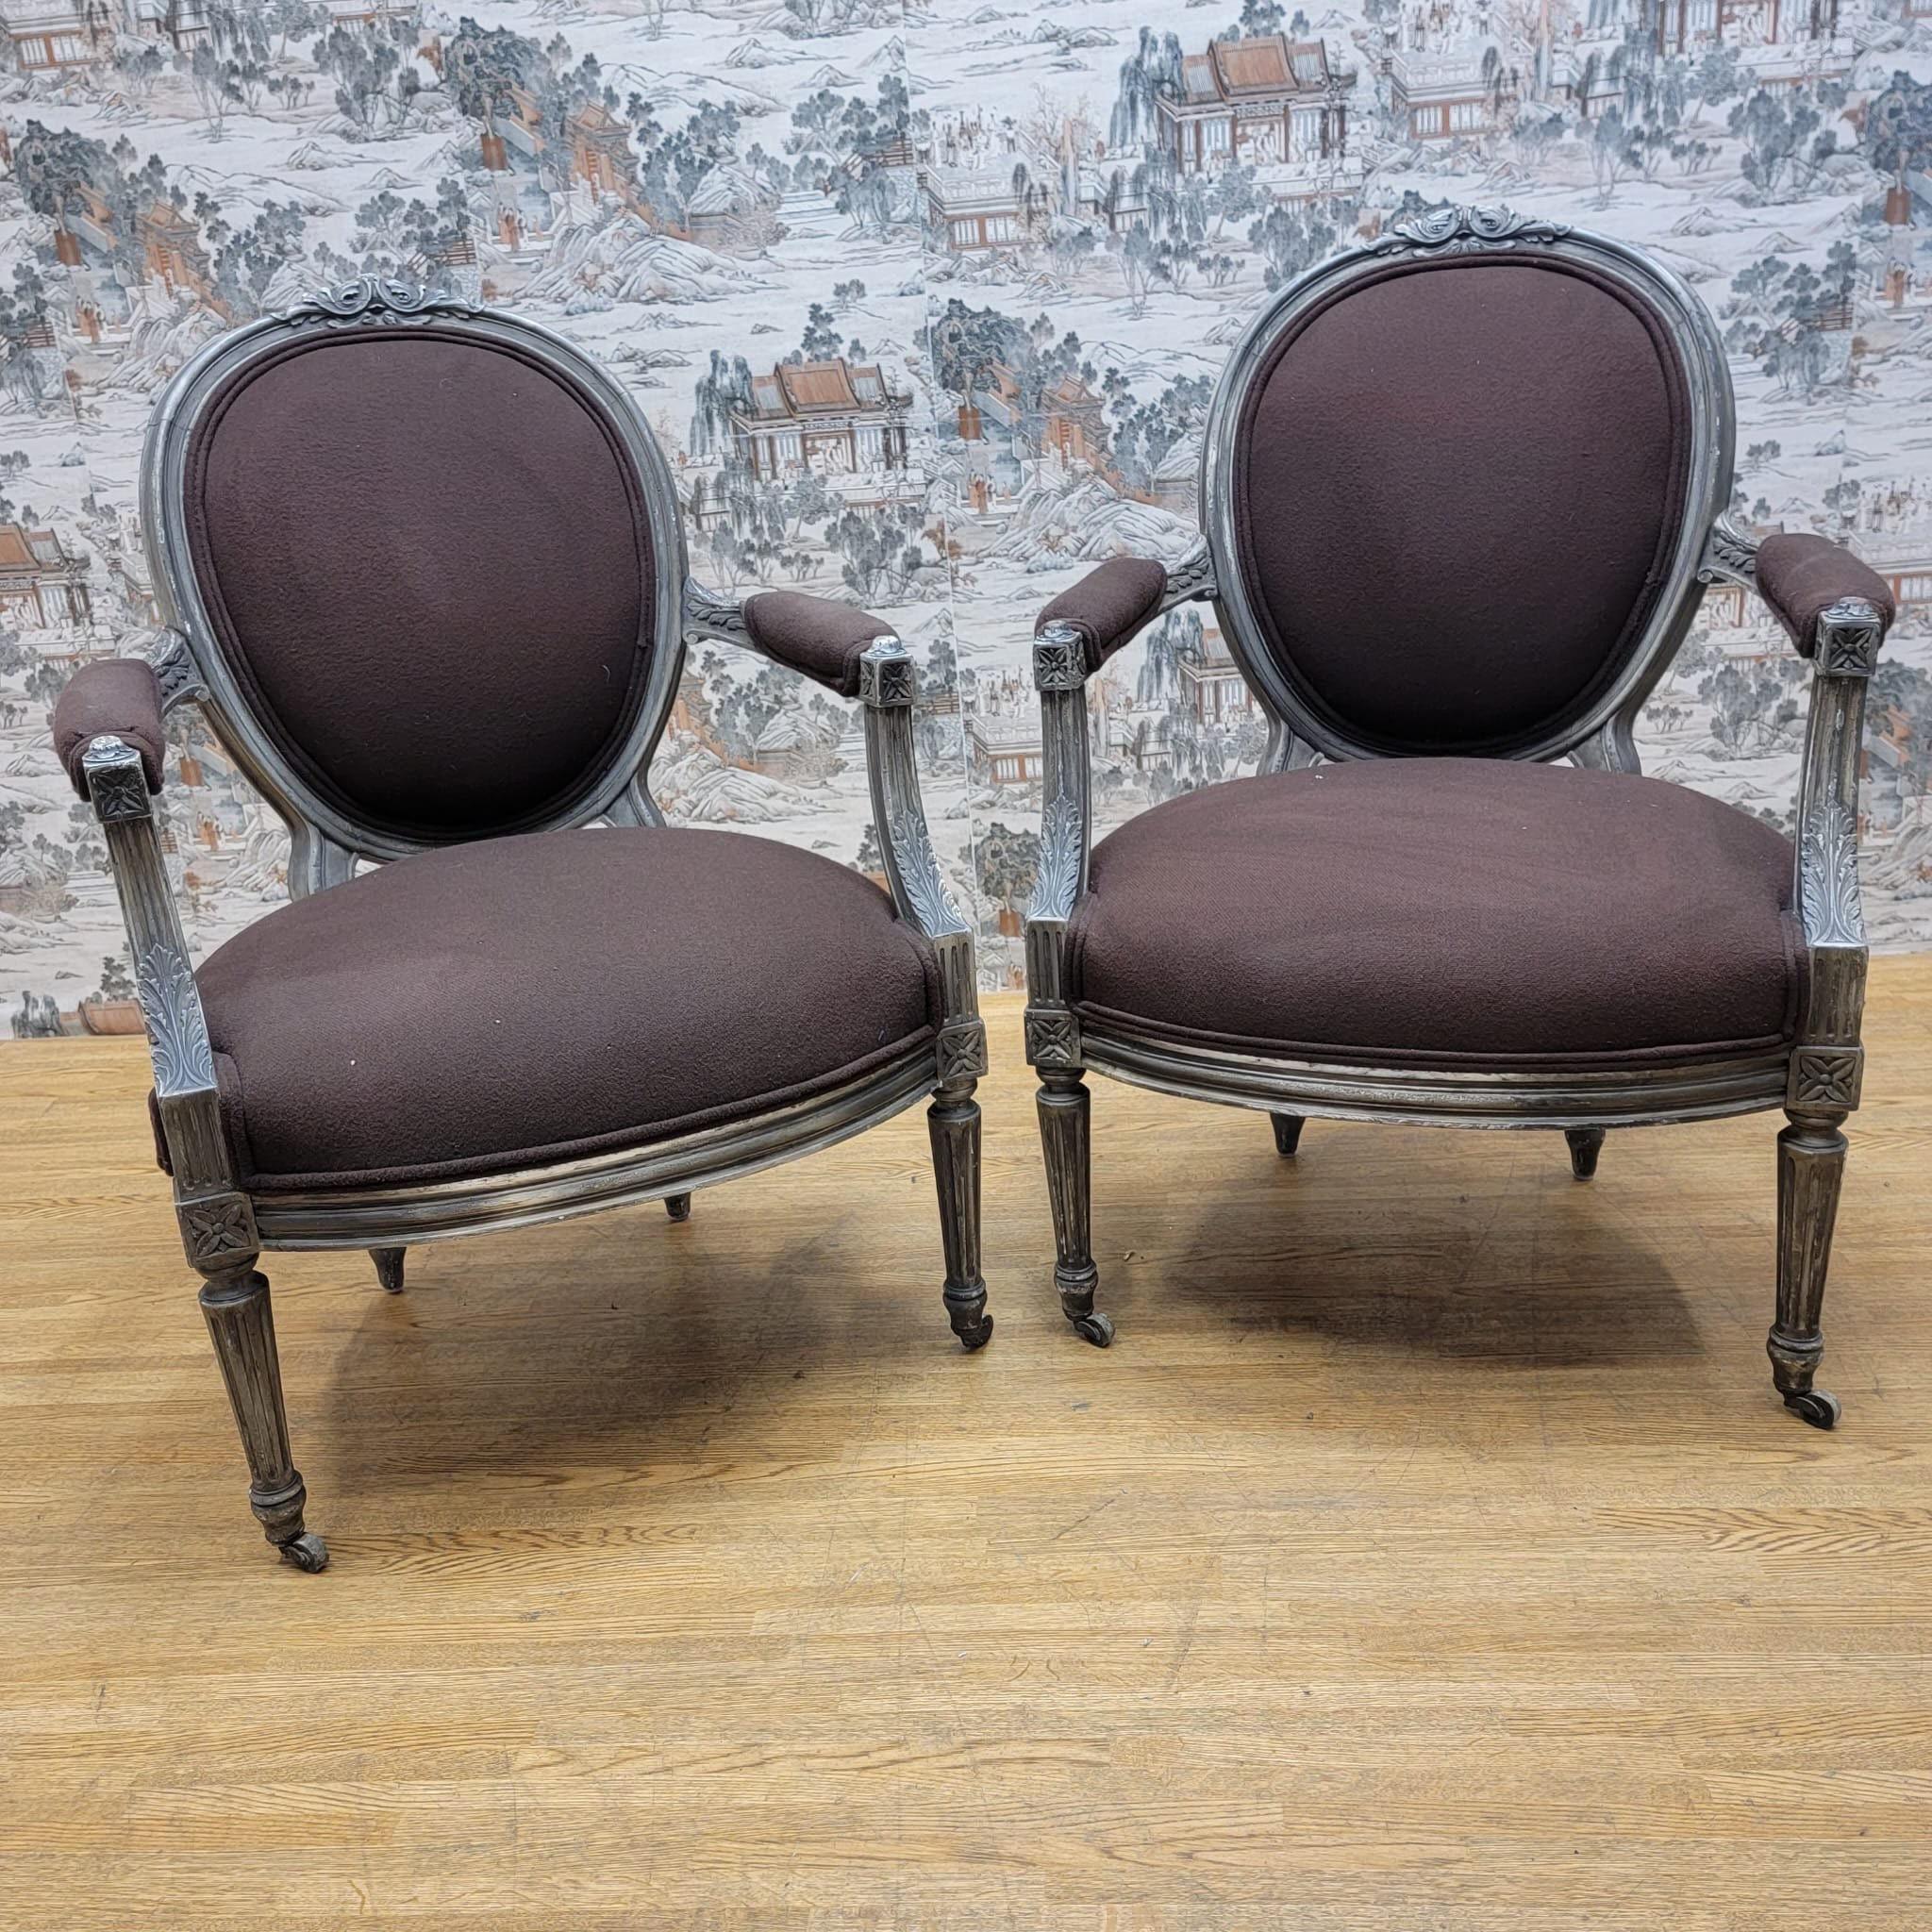 Antique French Louis XVI Style Hand Carved Silver Gilt Framed Fauteuil Armchairs - Pair 

Antique Pair of Louis XVI style Antique Silver Gilt Armchairs/Fauteuils. Each chair features a padded oval back that flows effortlessly into the padded seat.